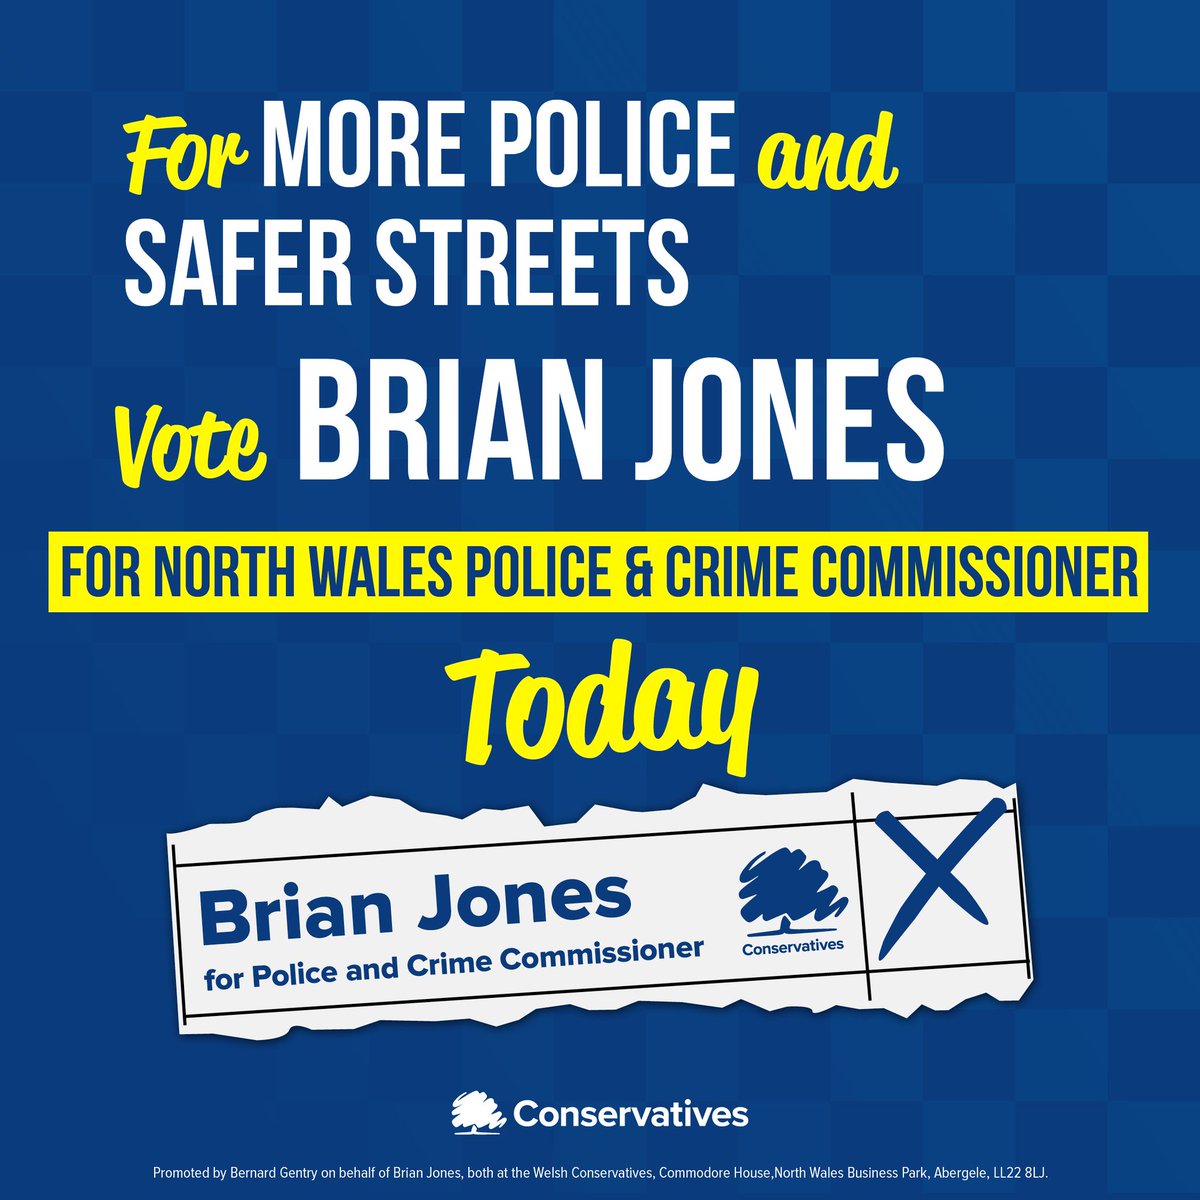 🚔 There's still time to cast your ballot in today's Police and Crime Commissioner election in North Wales. 🕙 Polls close at 10pm. 🪪 Remember to take photo ID. #VoteConservative 🗳️